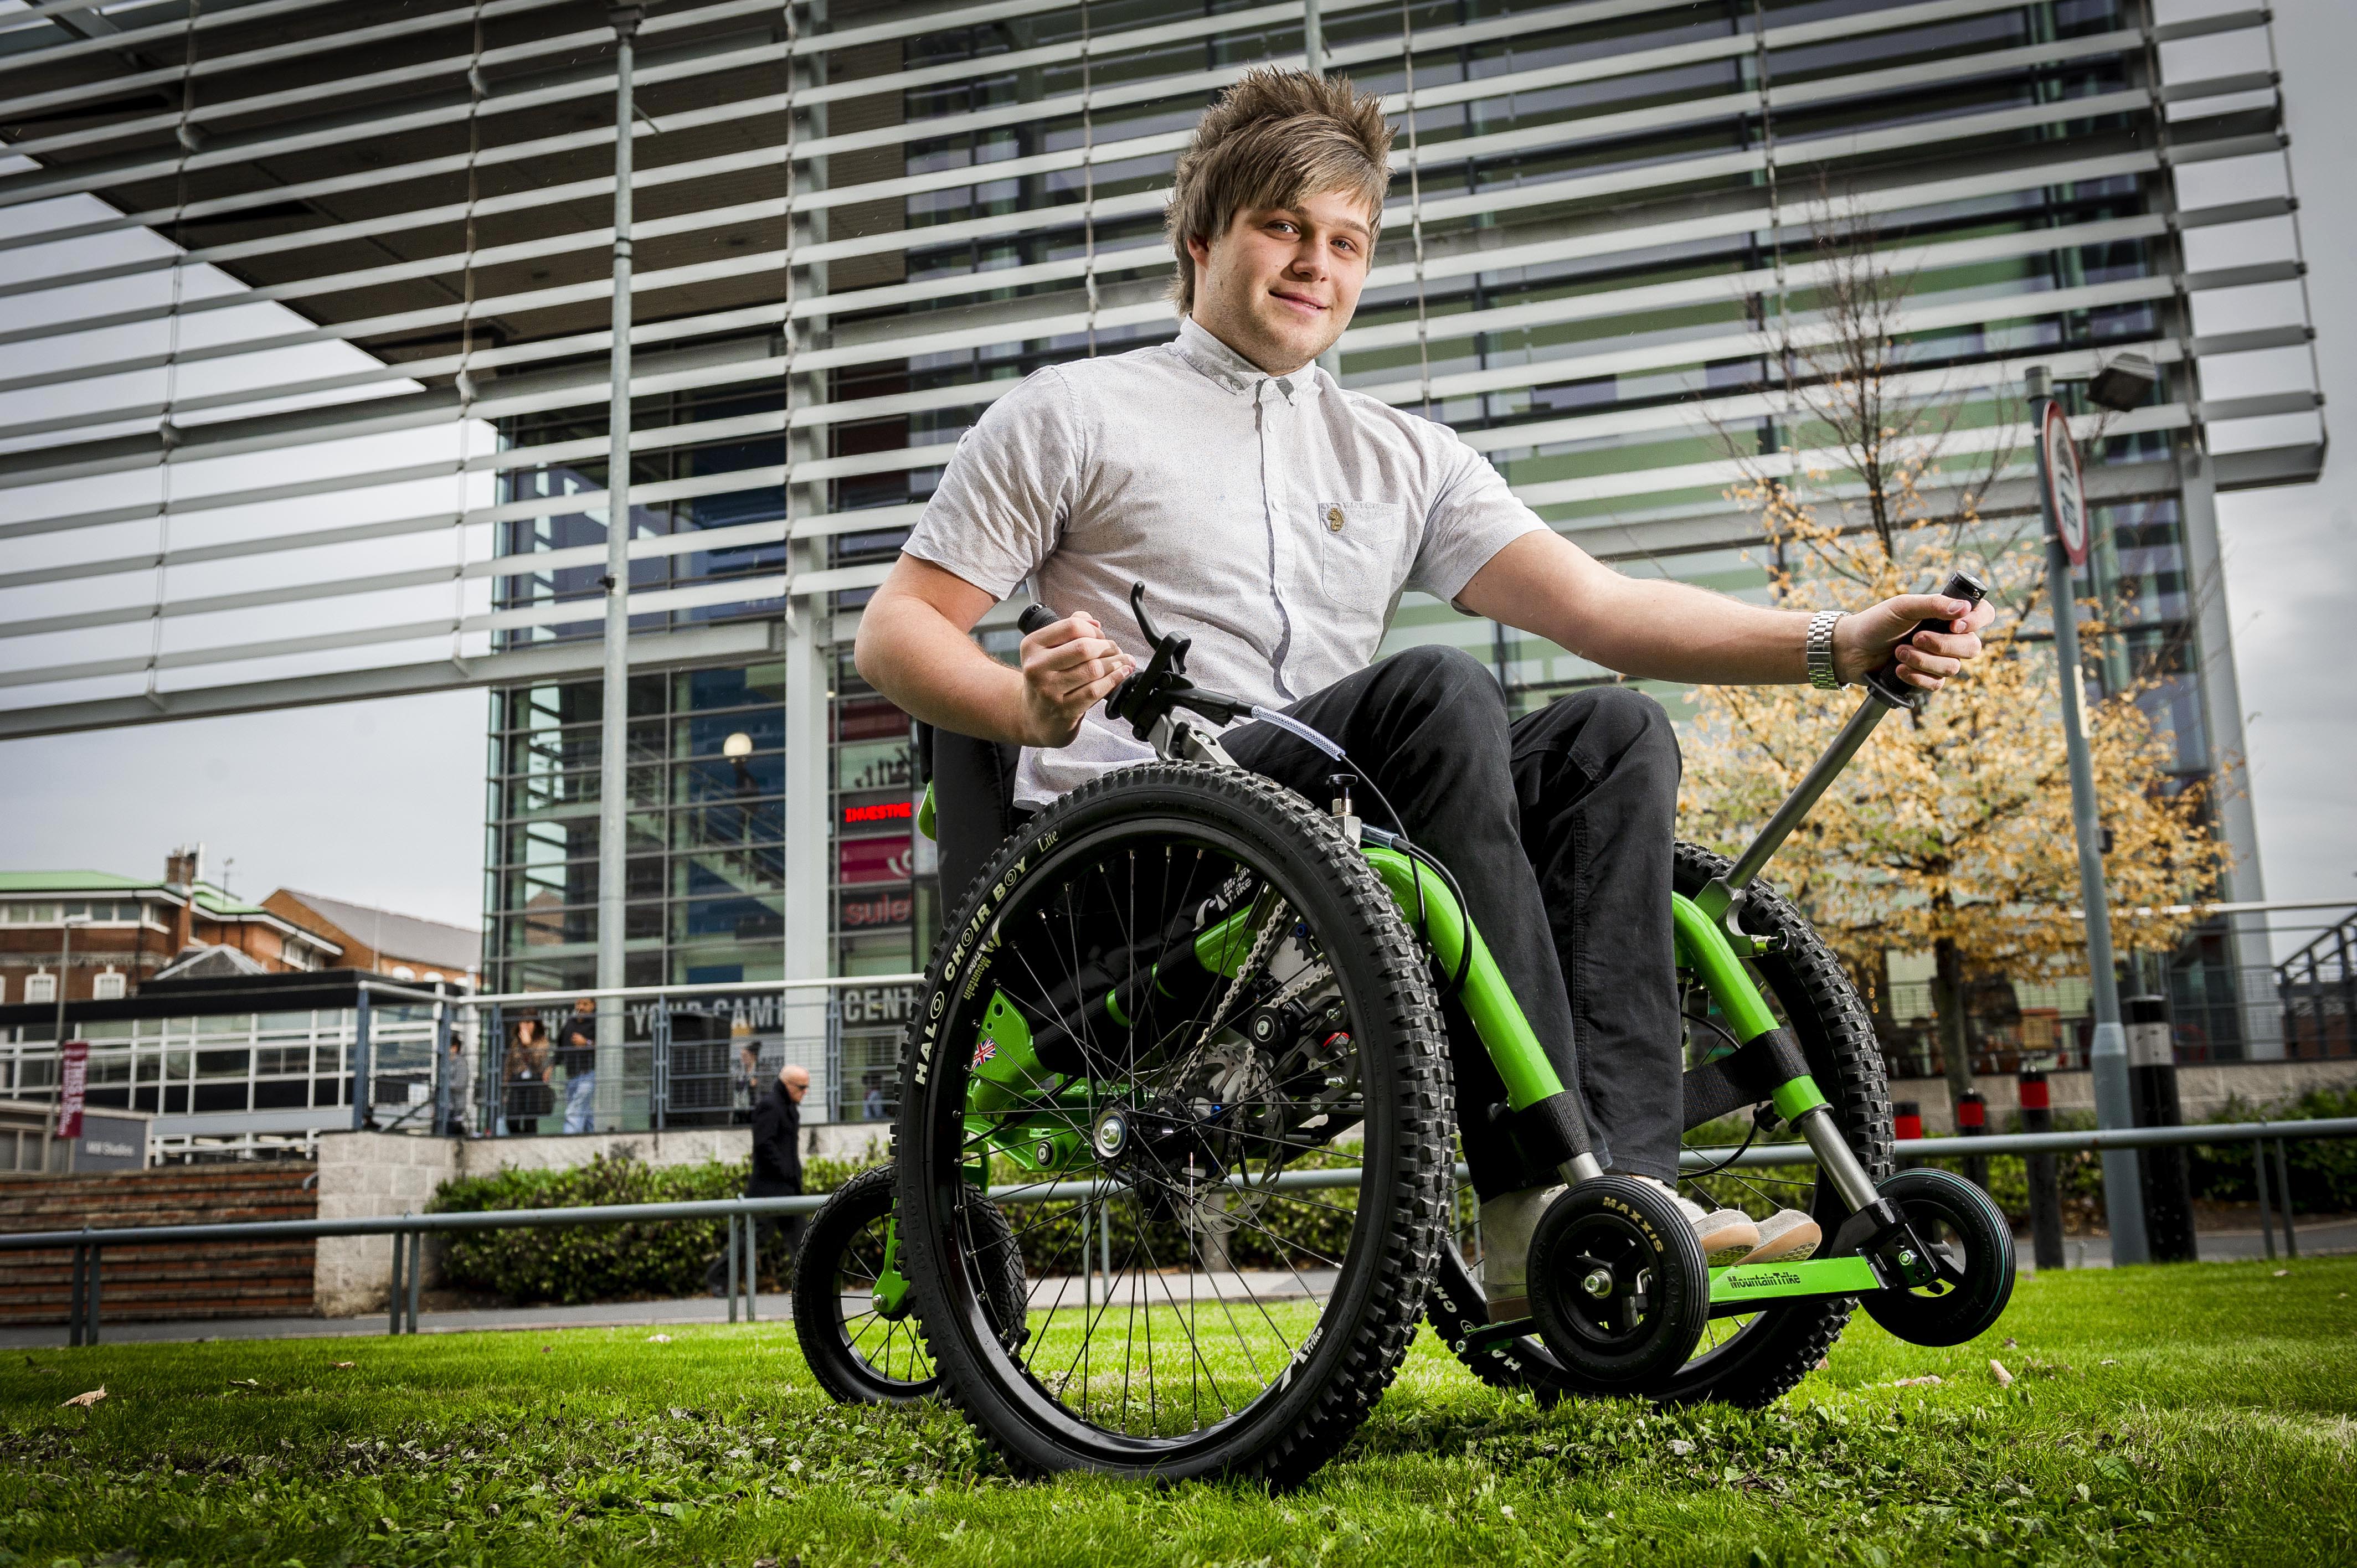 University offers off-road wheelchair for students